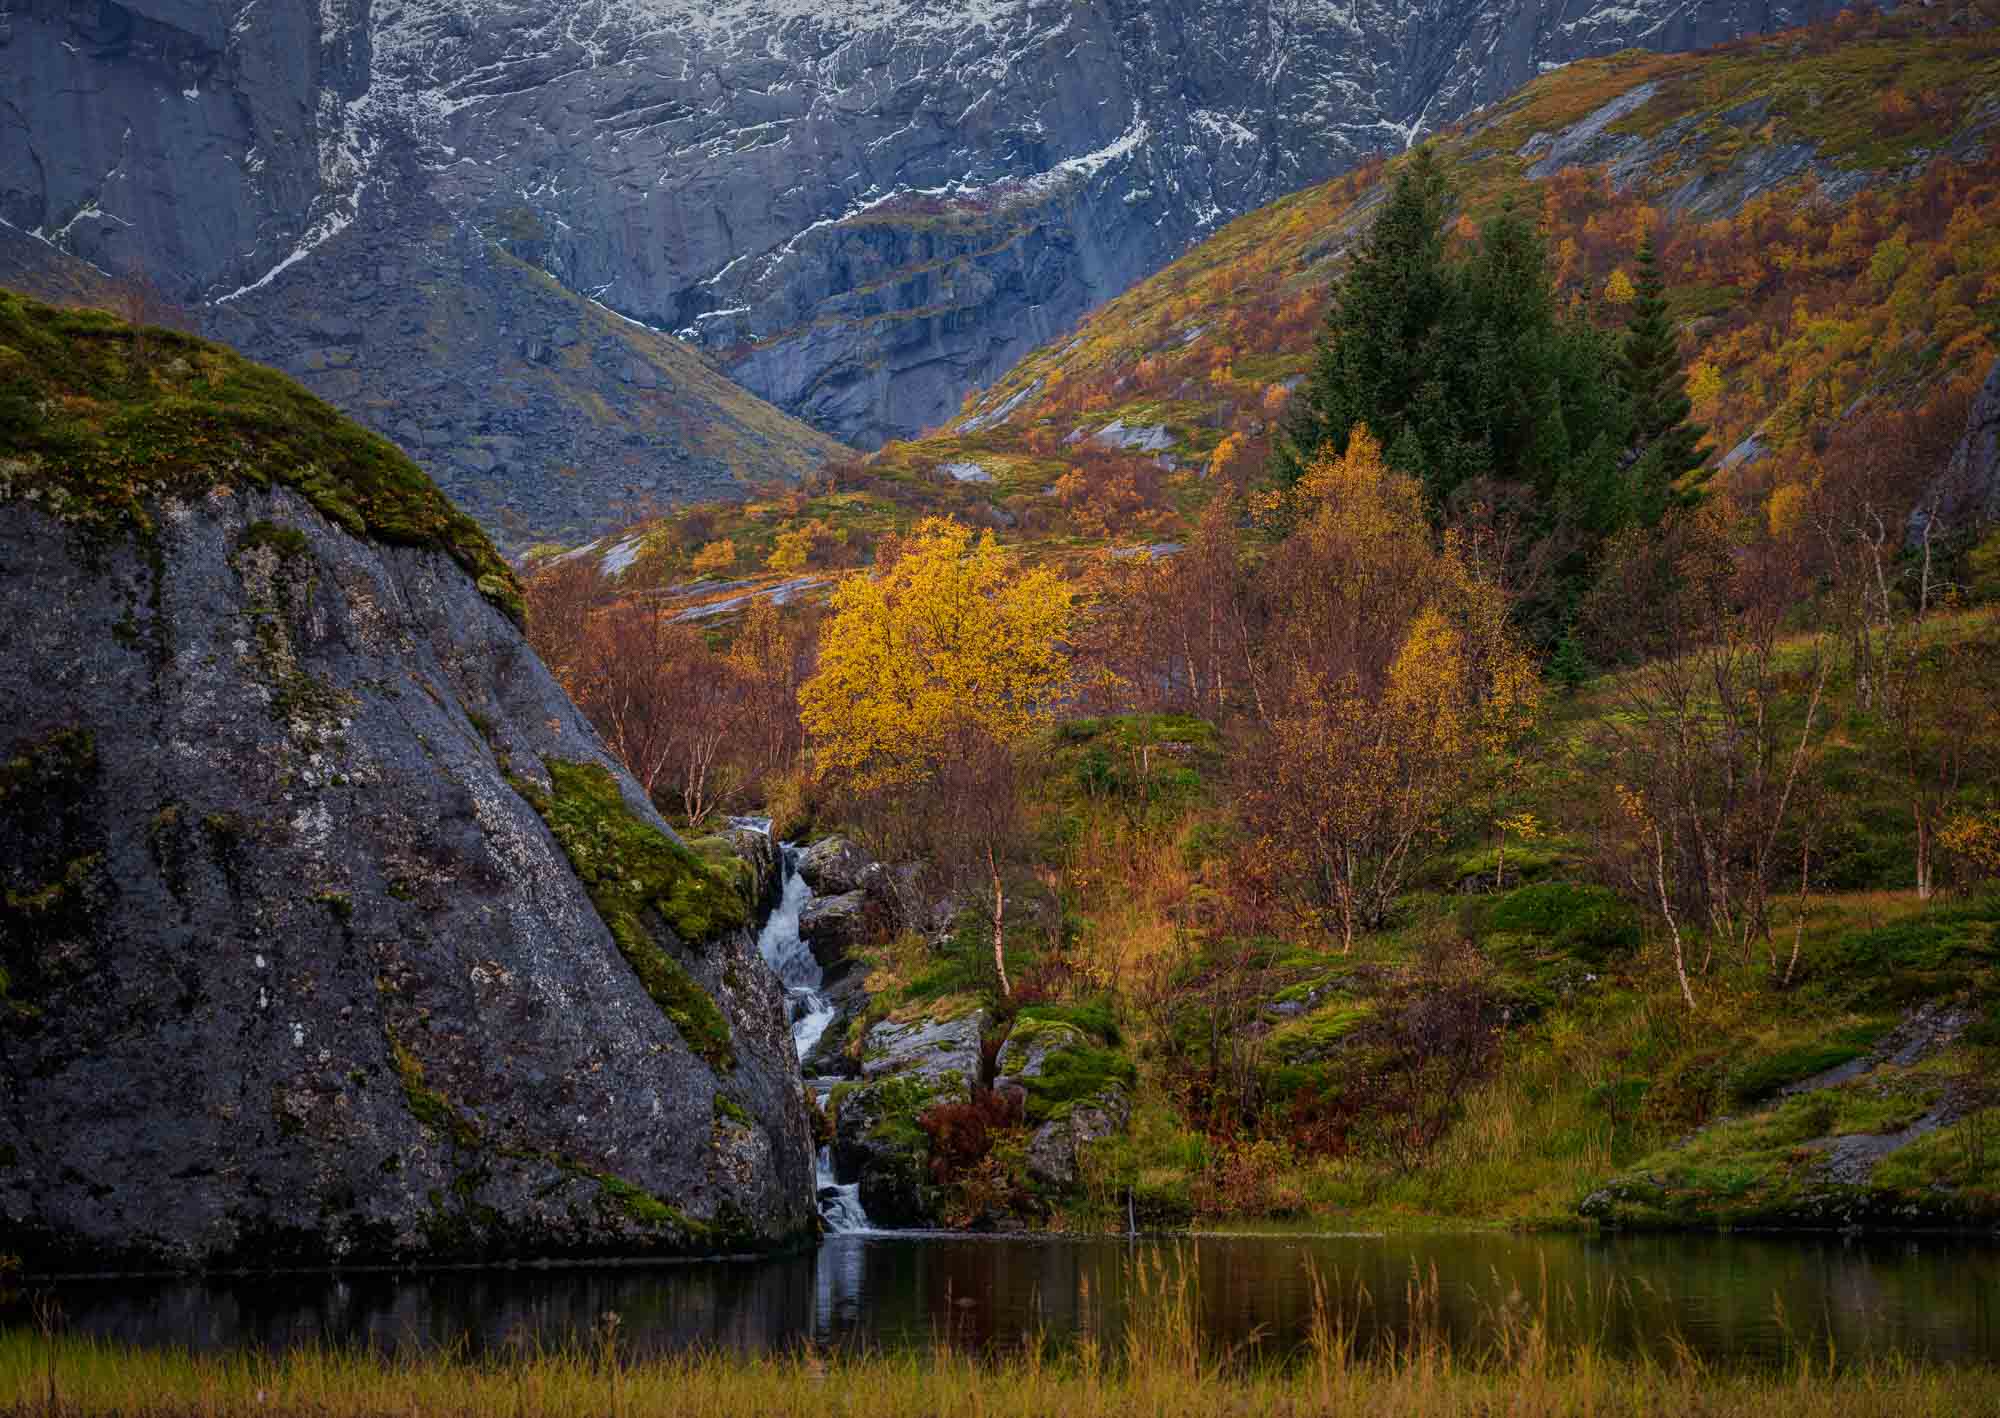 Small waterfall flowing into a pond amidst colorful autumn trees in Nusfjord, Lofoten, with rugged cliffs in the background.